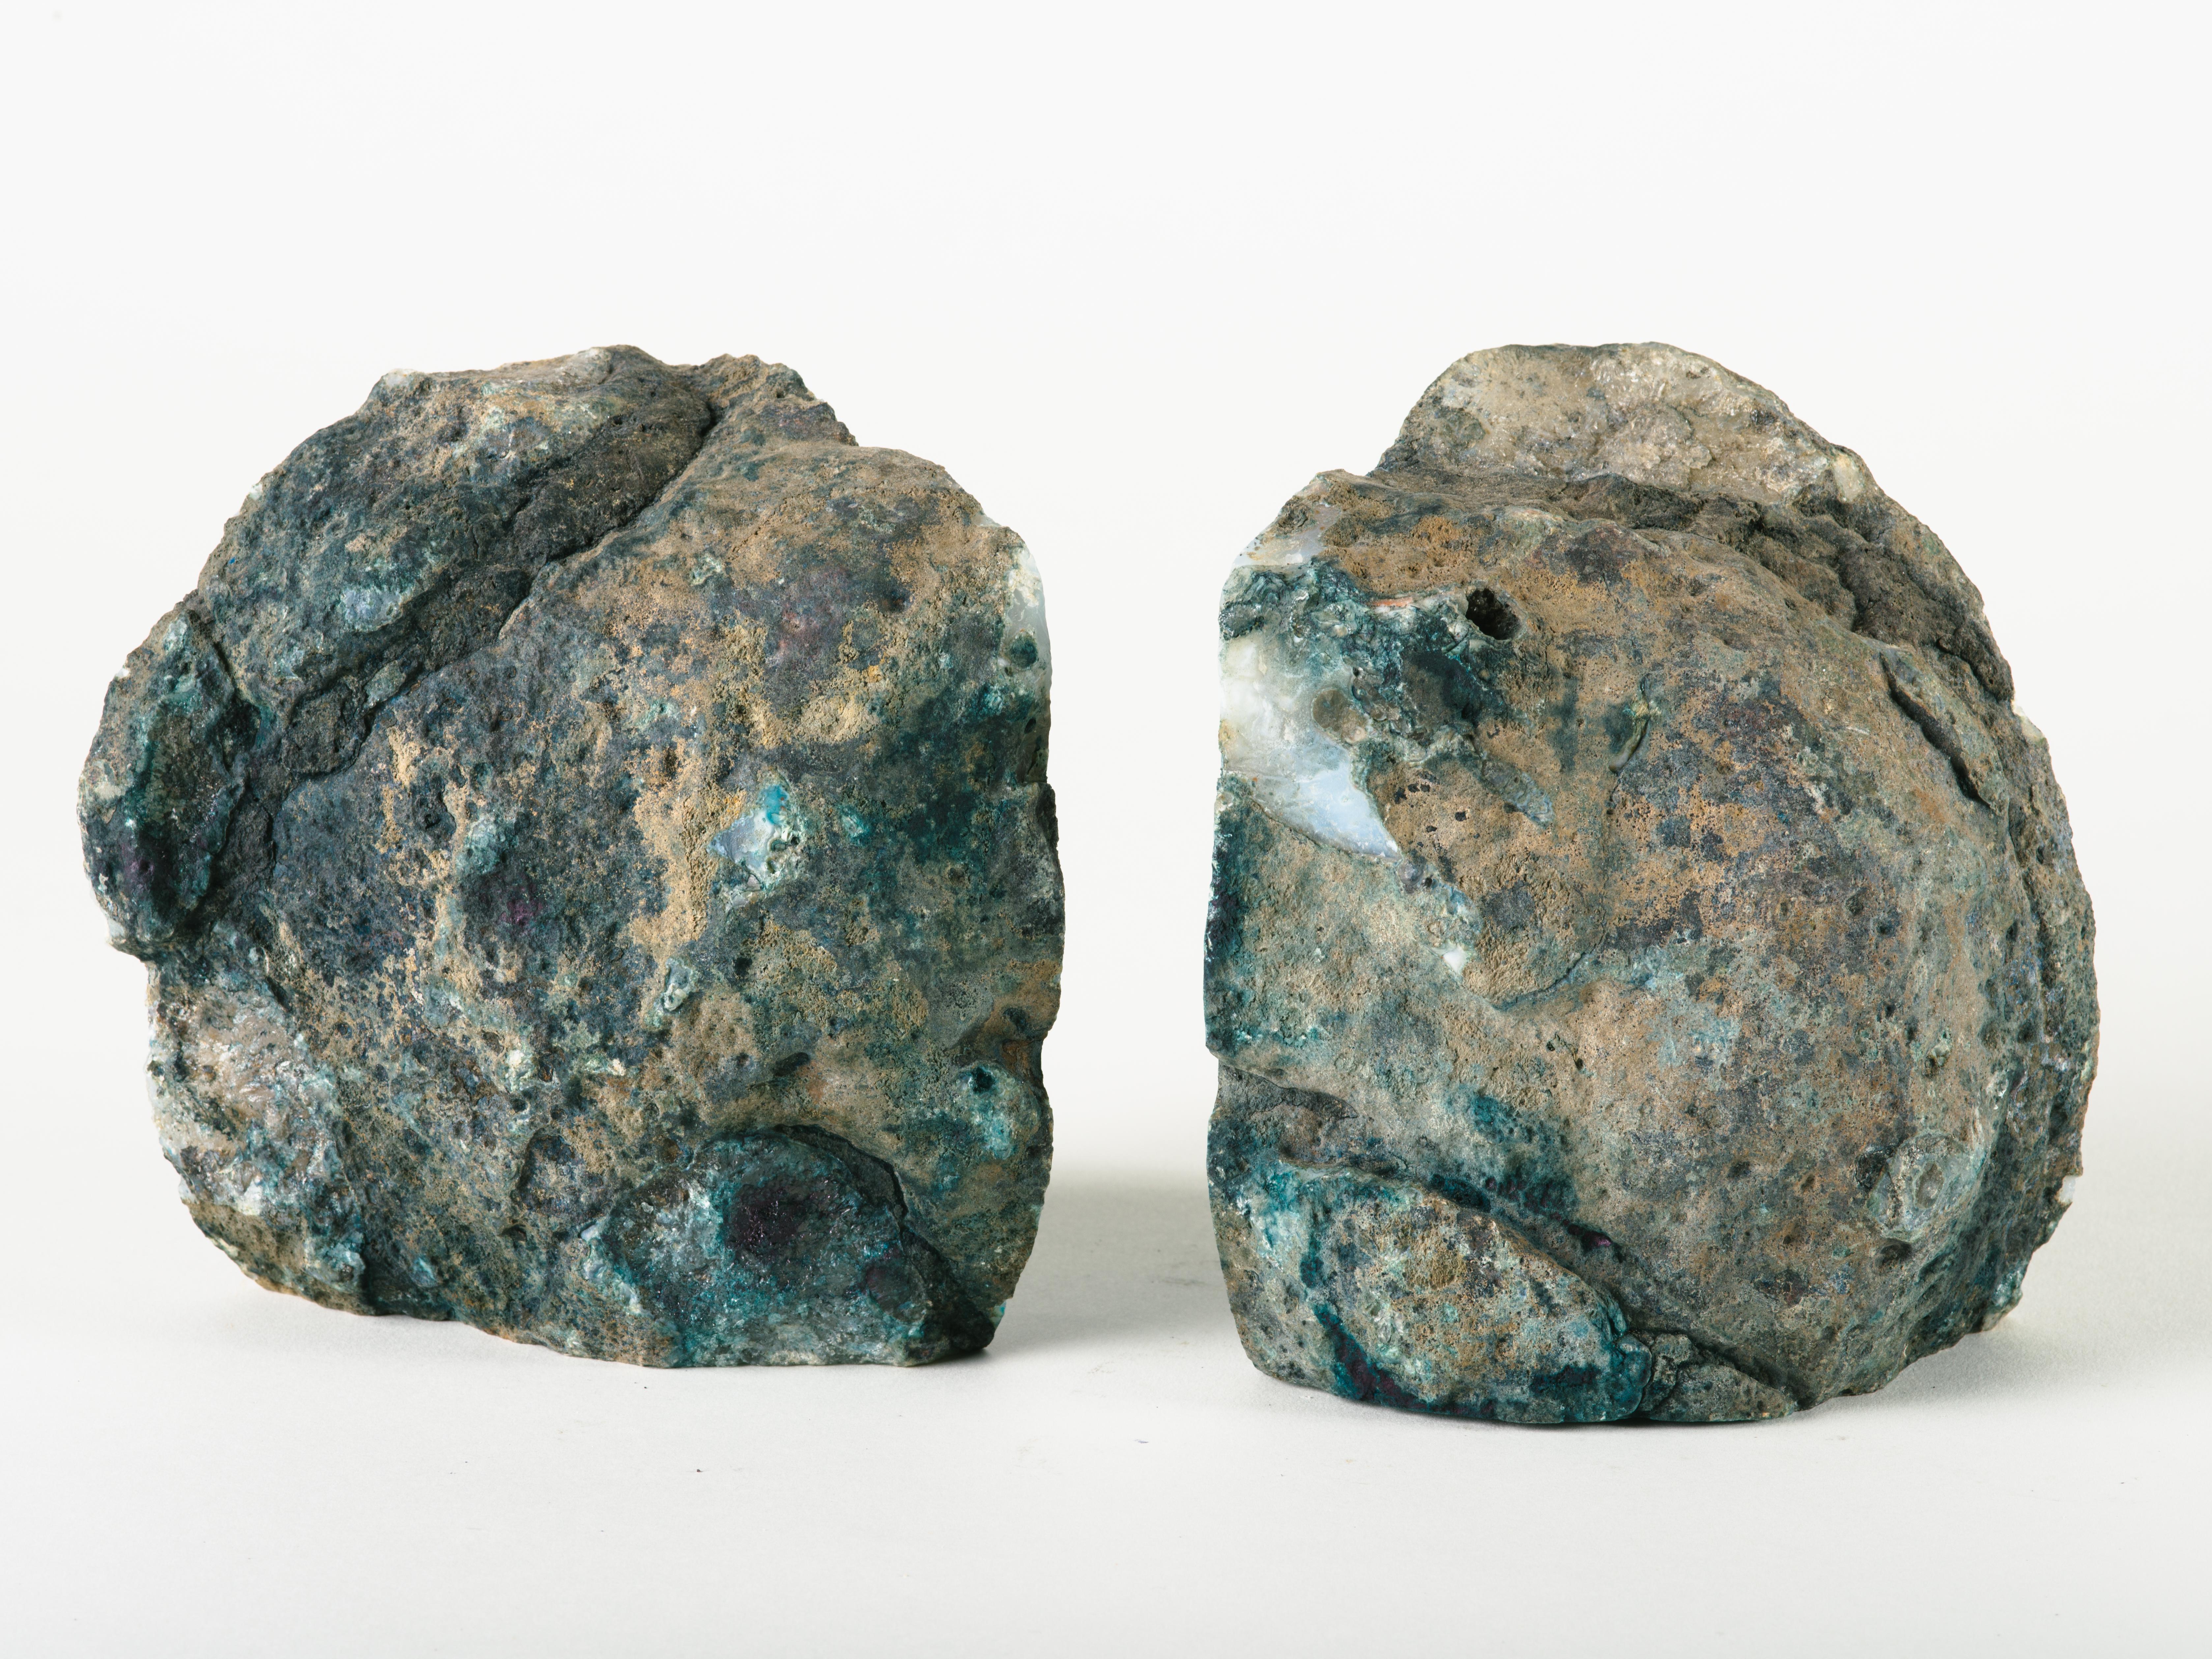 Contemporary Pair of Crystal Geode Bookends with Hues of Turquoise